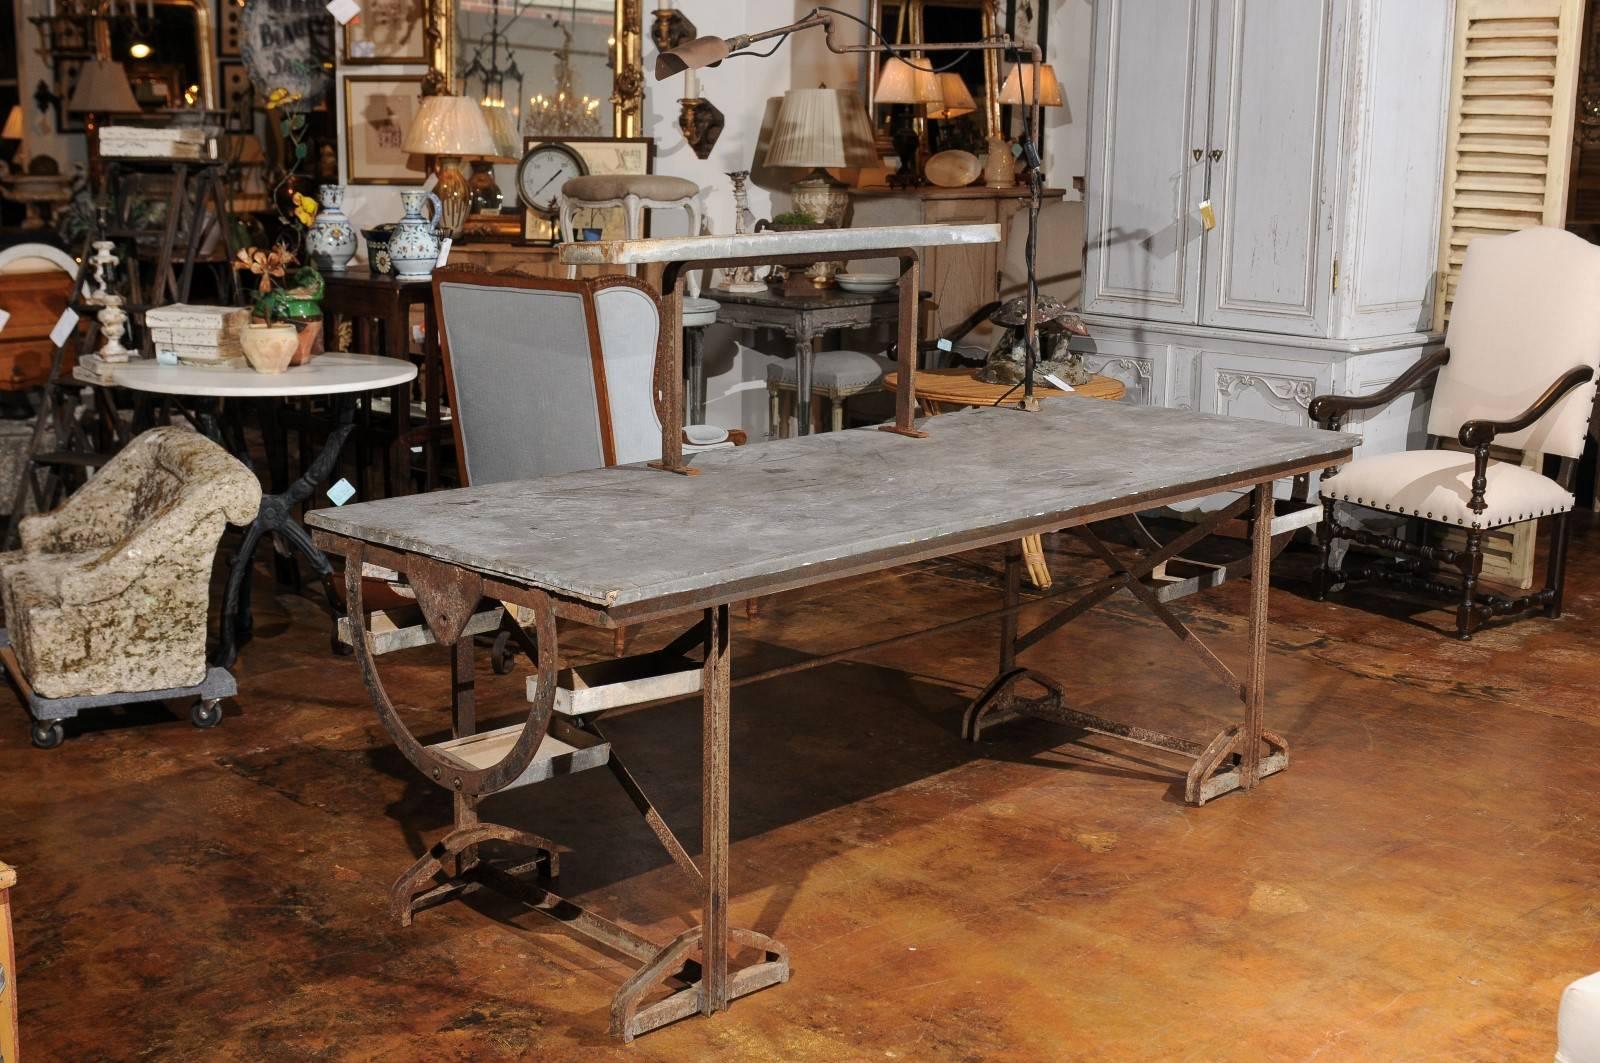 A French industrial two-tiered work table with iron armature and zinc top, task light and small shelves from the late 19th century. Born a few years after Emile Zola wrote some of his most famous novels featuring French workers from the second half